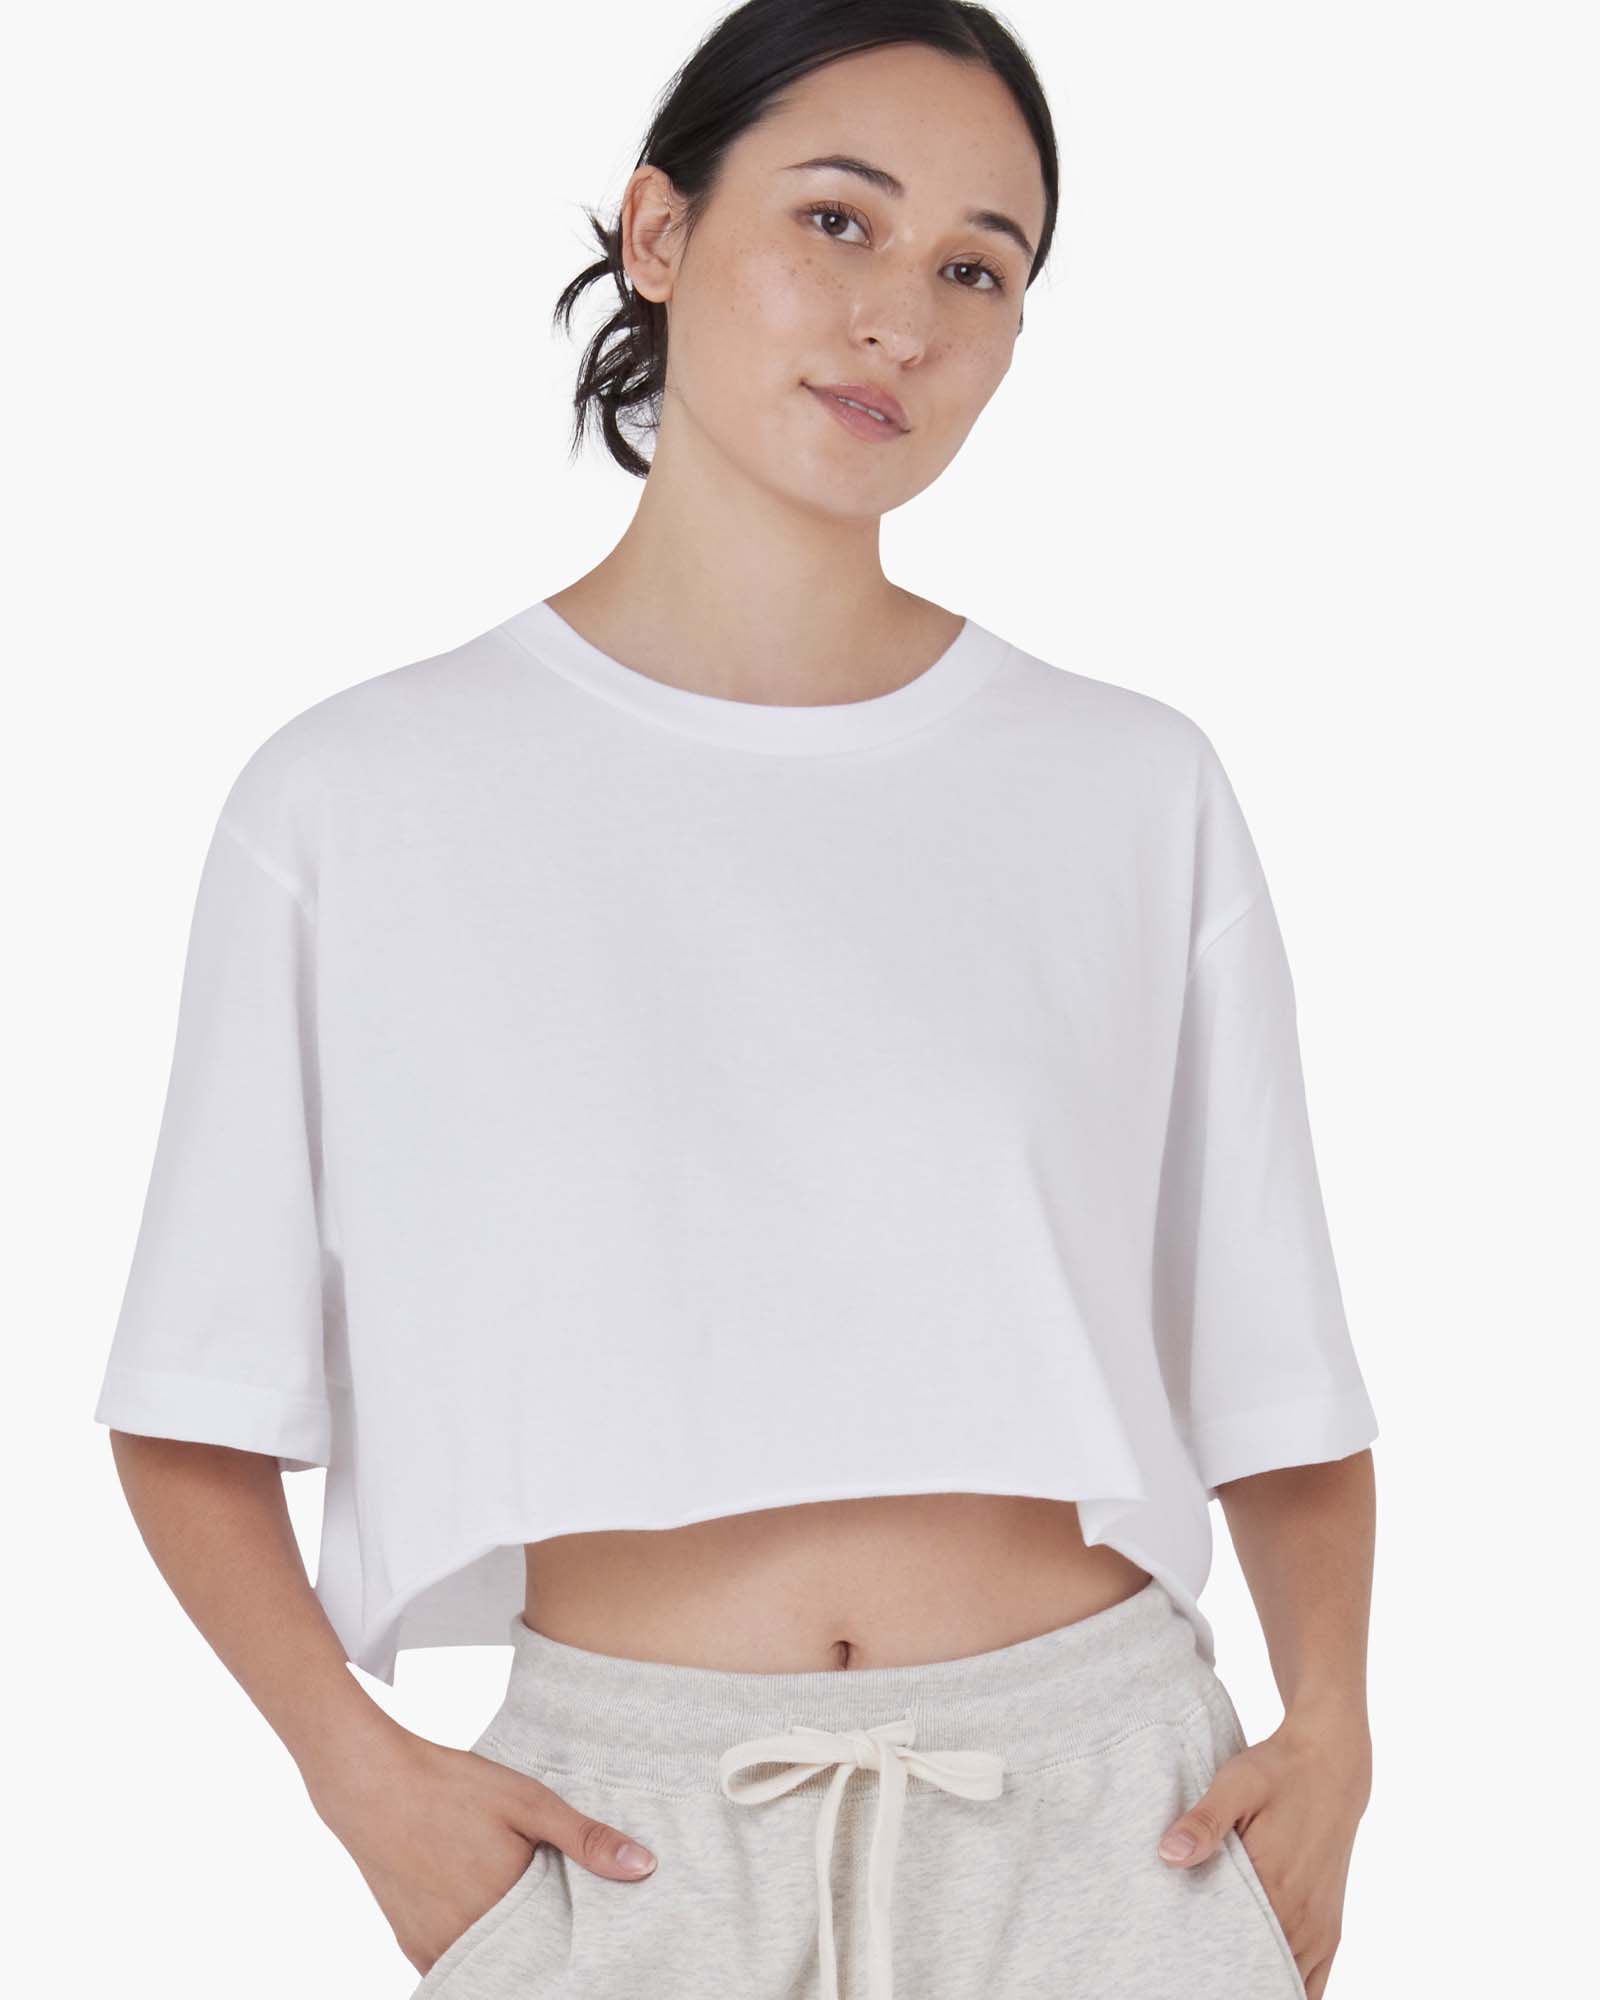 Cropped Tee in White | TKEES Women\'s – T-Shirts | Clothing